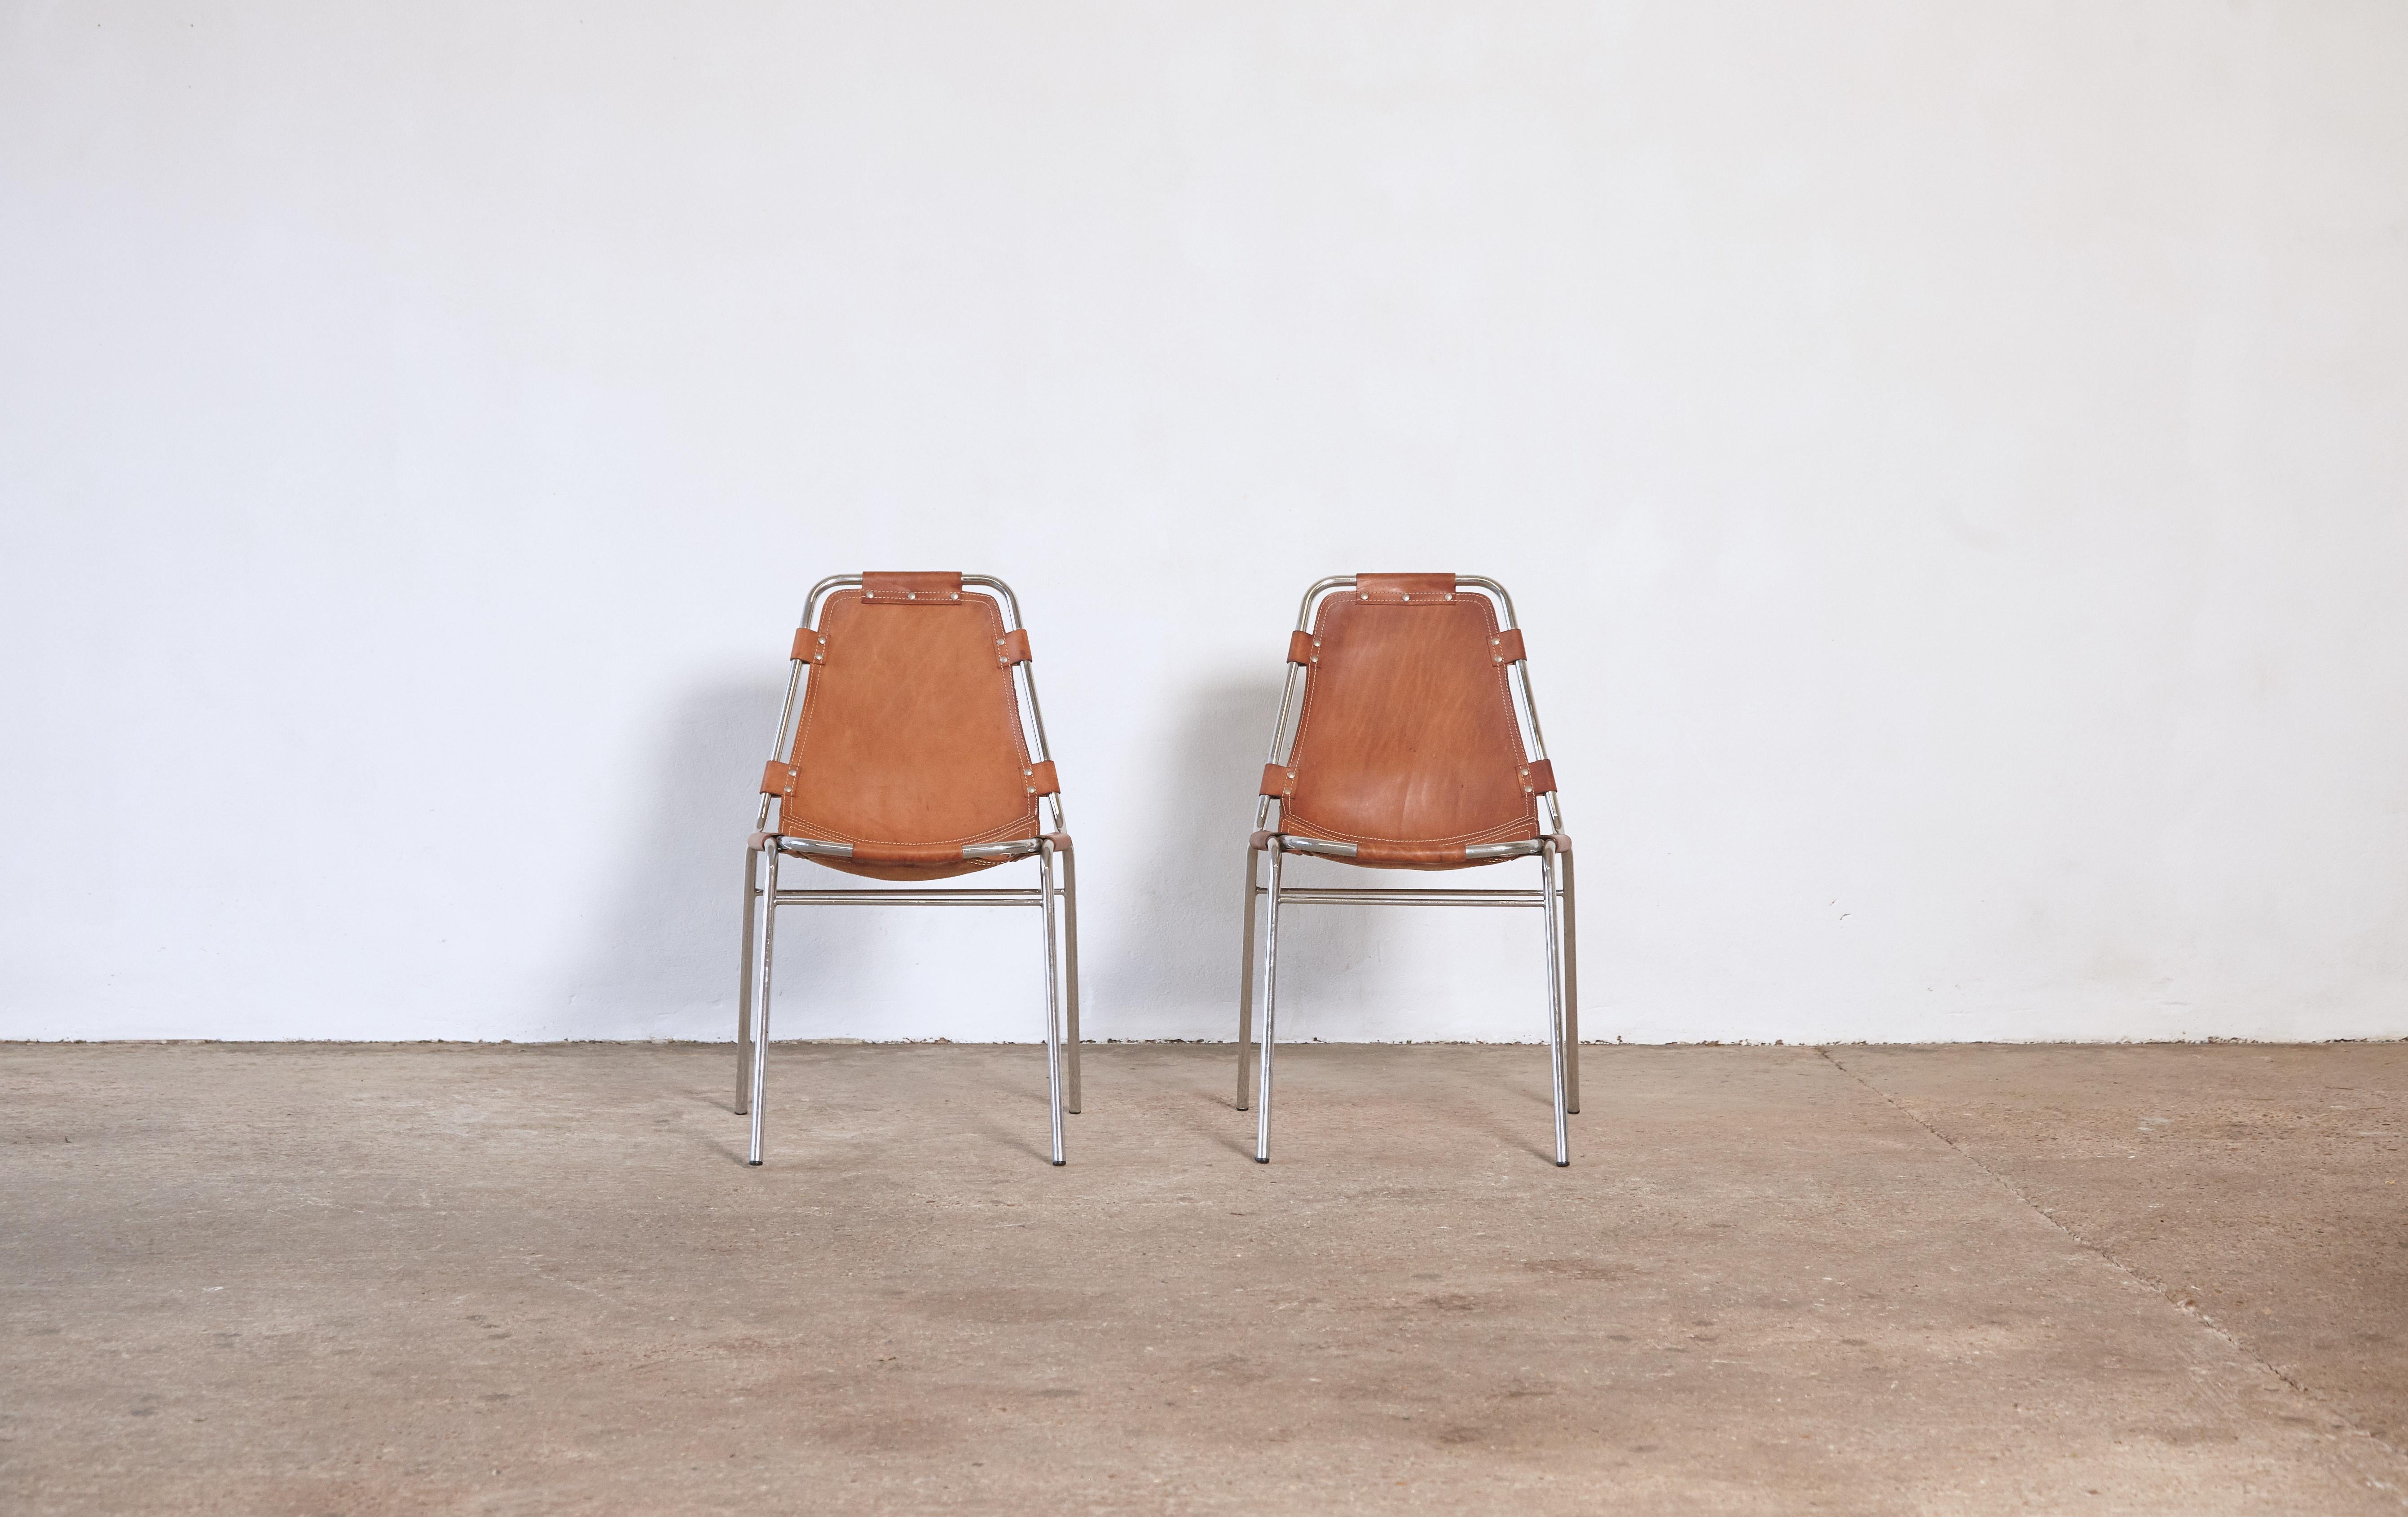 A very nice pair of 'Les Arcs' chairs in tubular steel and cognac leather, France/Italy, 1970s.

Les Arcs was a project on which Charlotte Perriand collaborated with some other architects who developed the interiors as well. These chairs are often